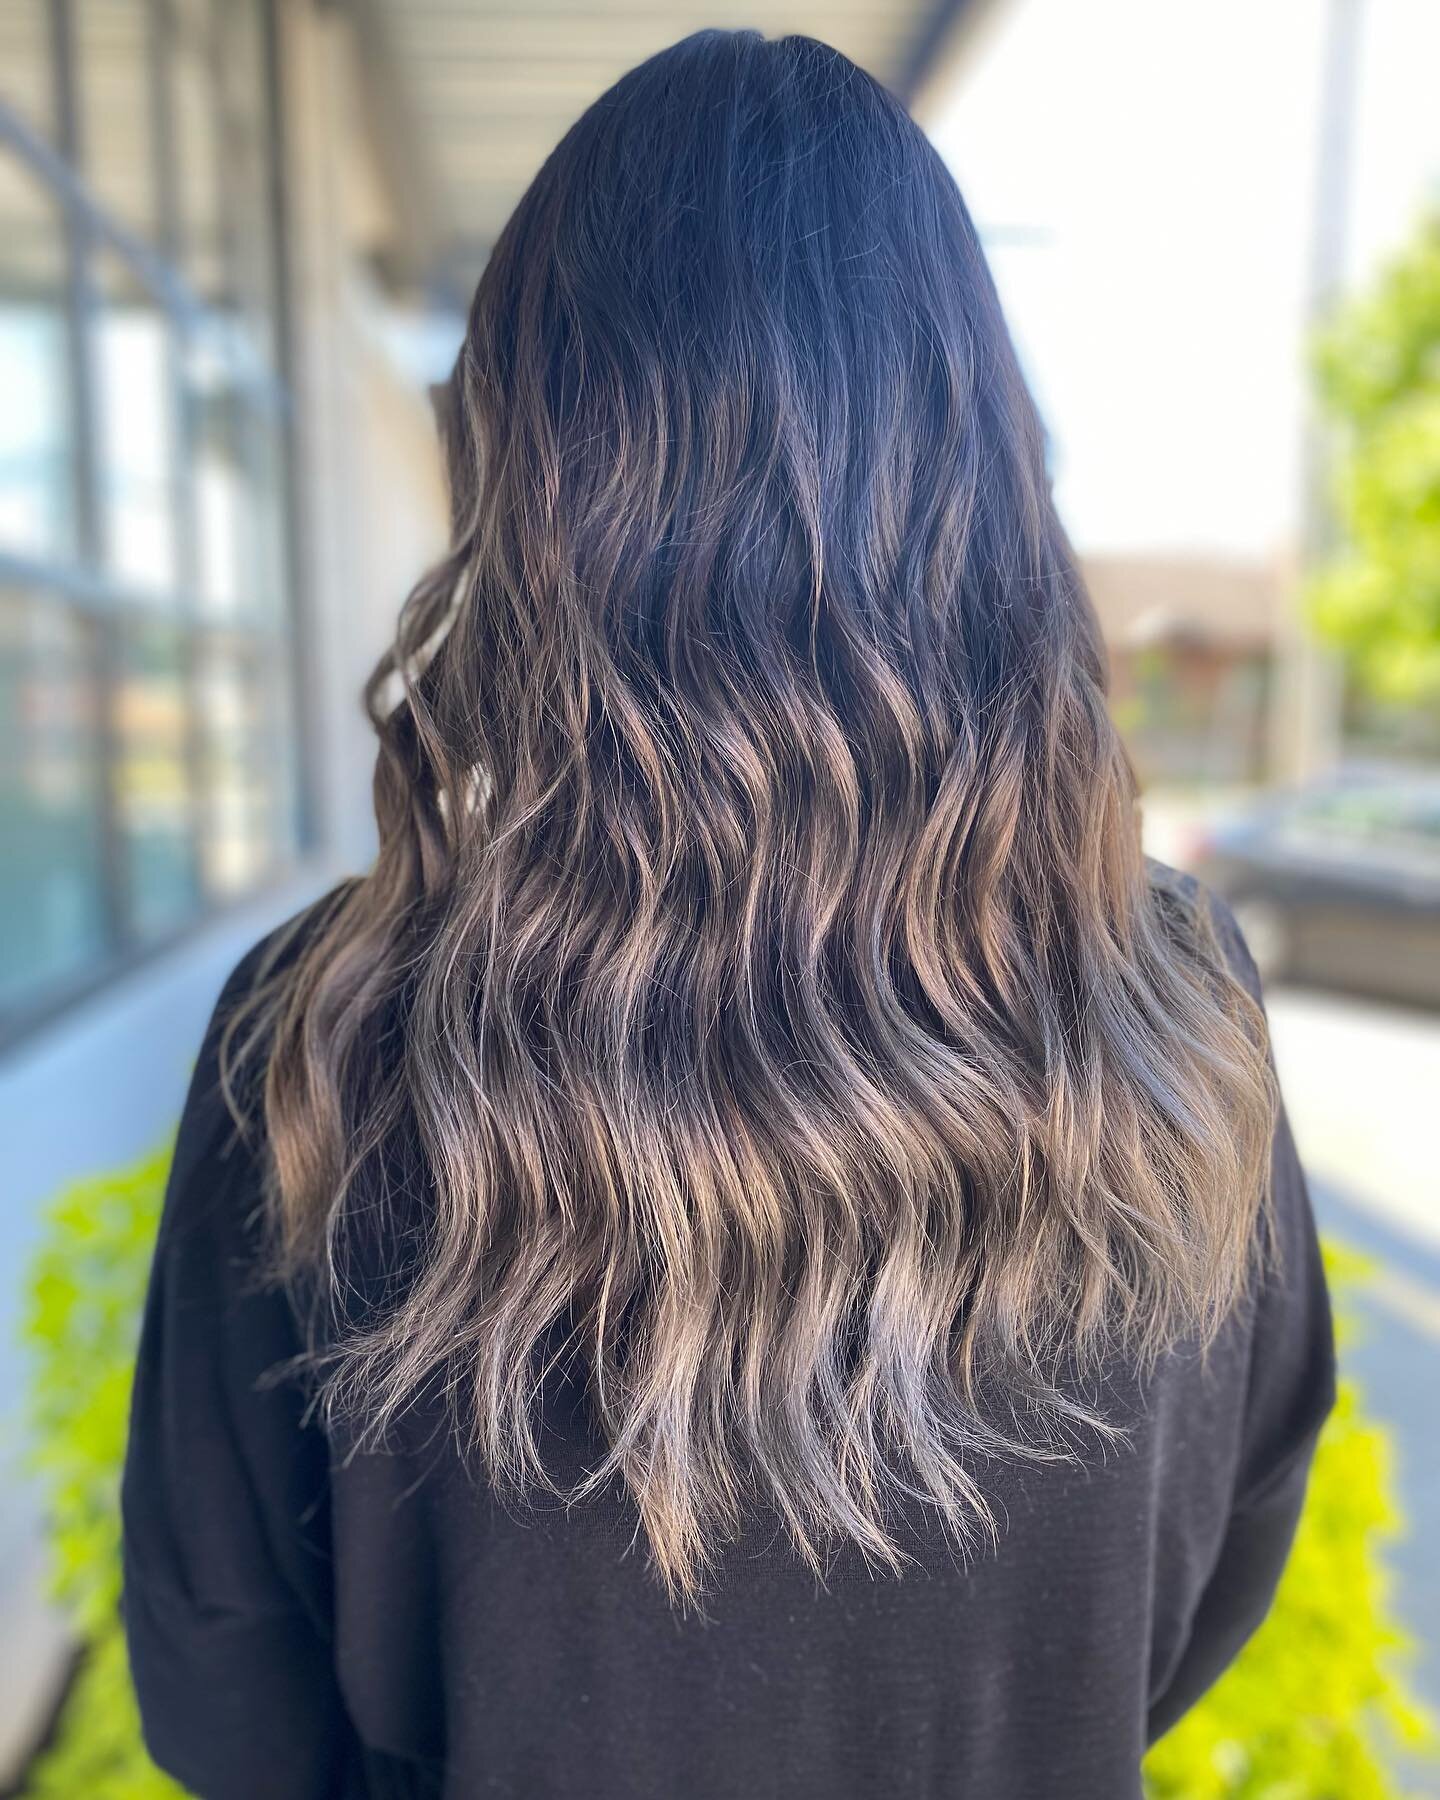 That little rain ☔️ drizzle this morning reminded me of this beautiful titanium color melt I did a few weeks back. I have been fairly quiet here as I&rsquo;m so busy behind the chair right now. But here is your reminder that weeknights and Saturdays 